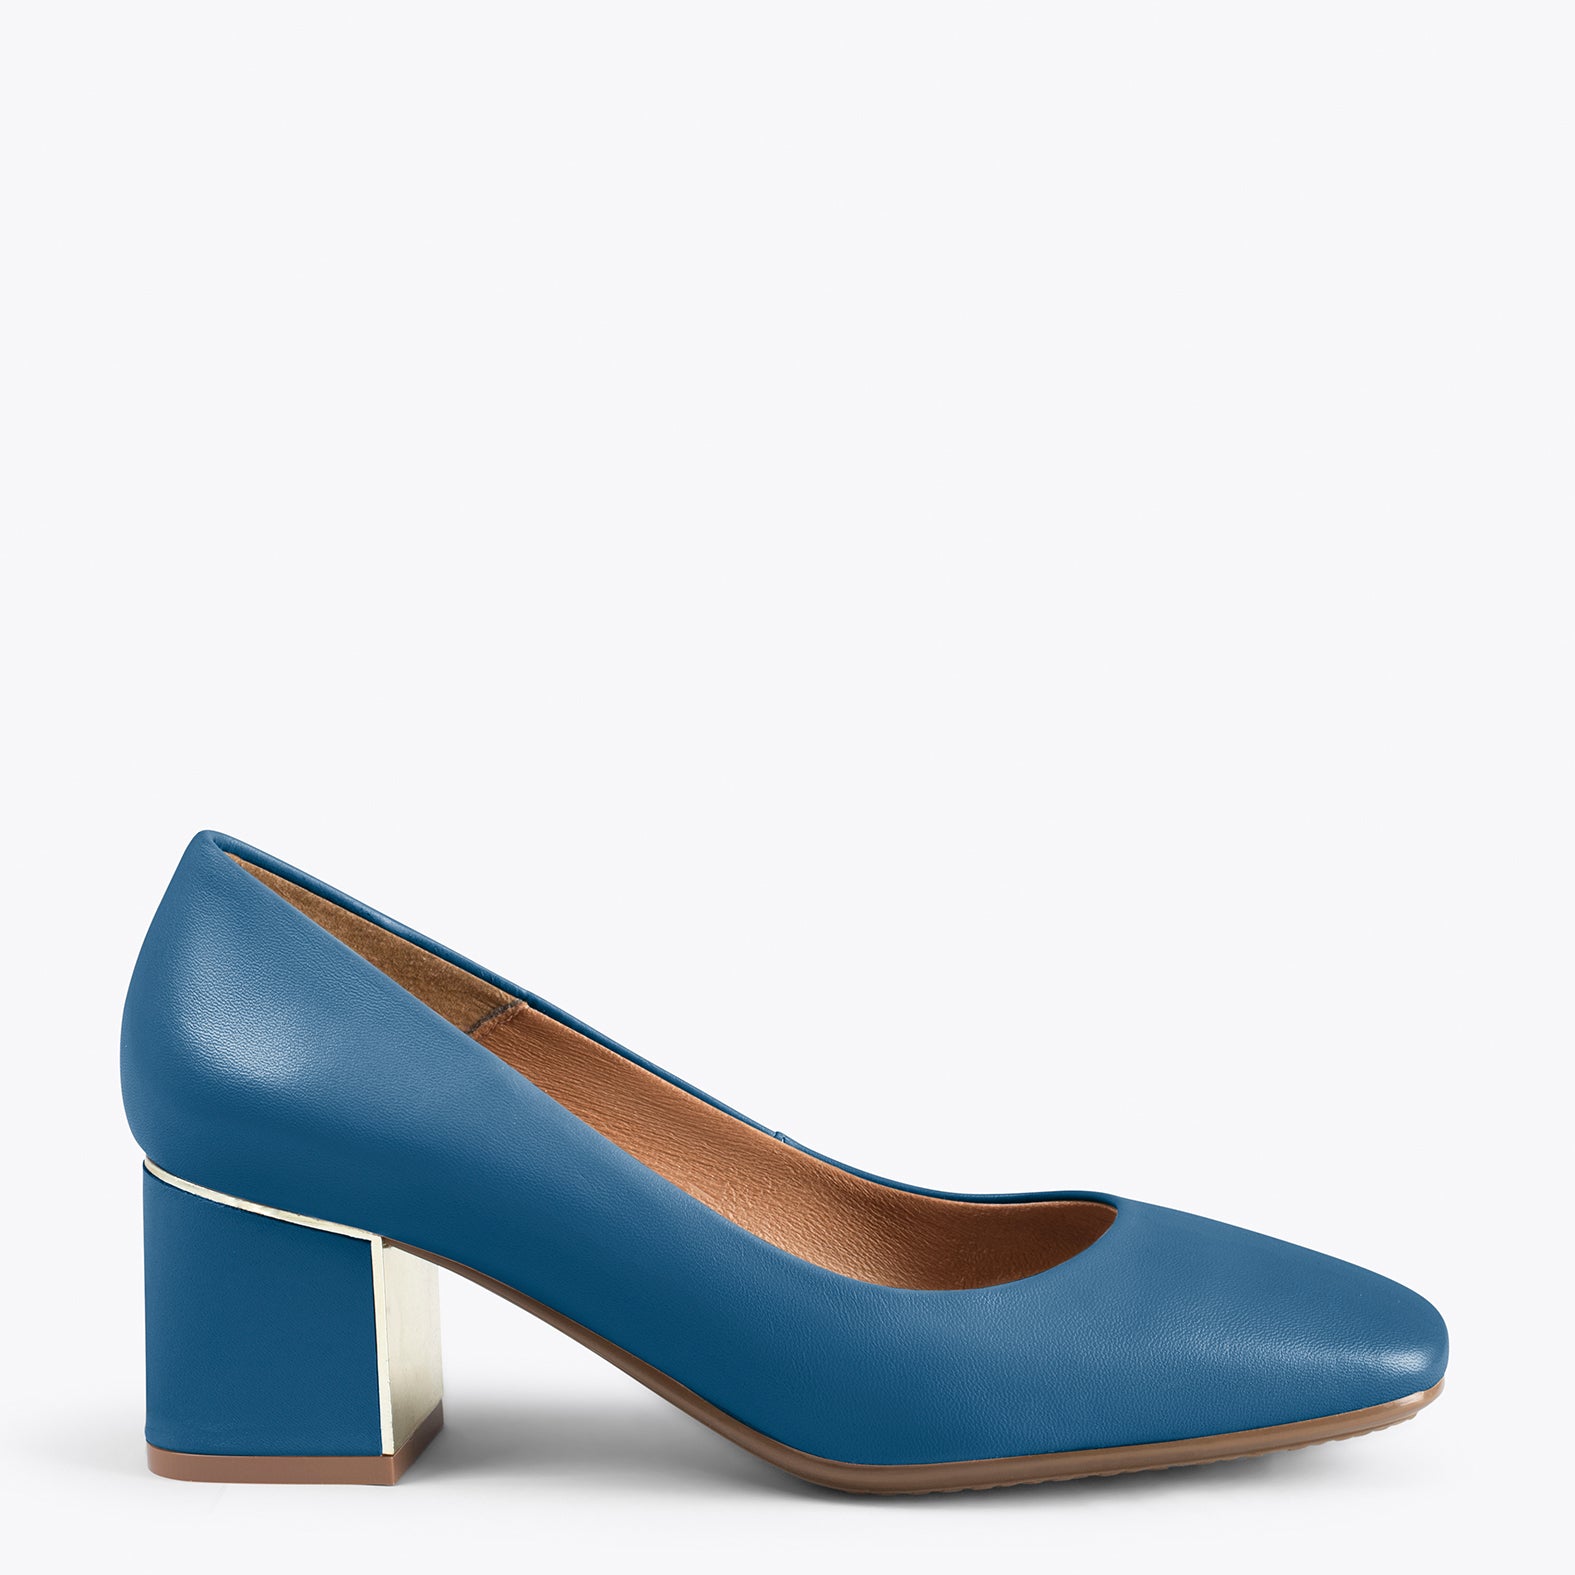 FEMME – BLUE high heels with square toe